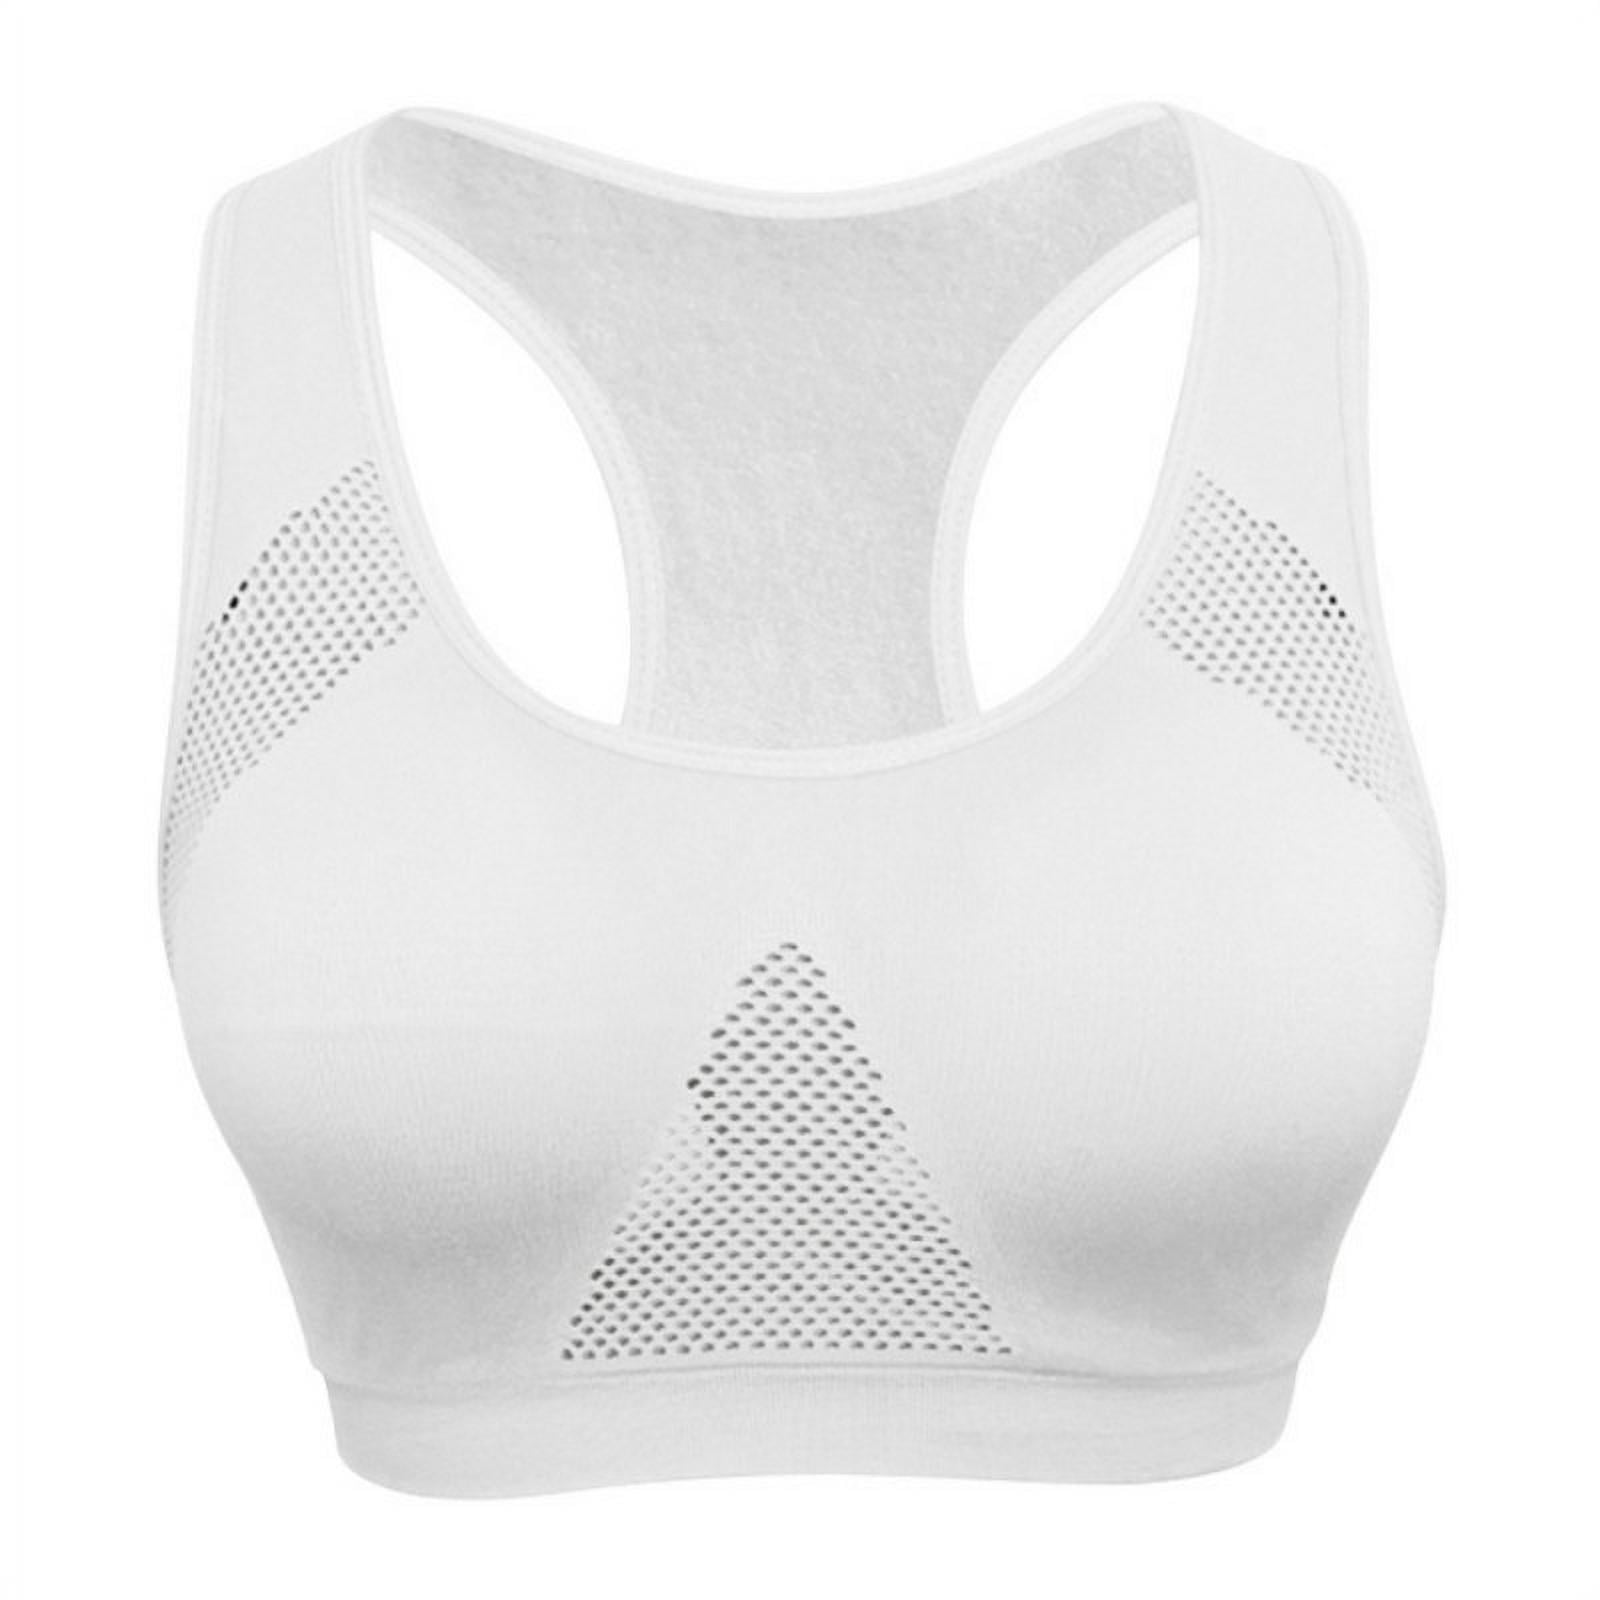 High Impact Sports Bras for Women Padded Sports Bras for Women Workout ...